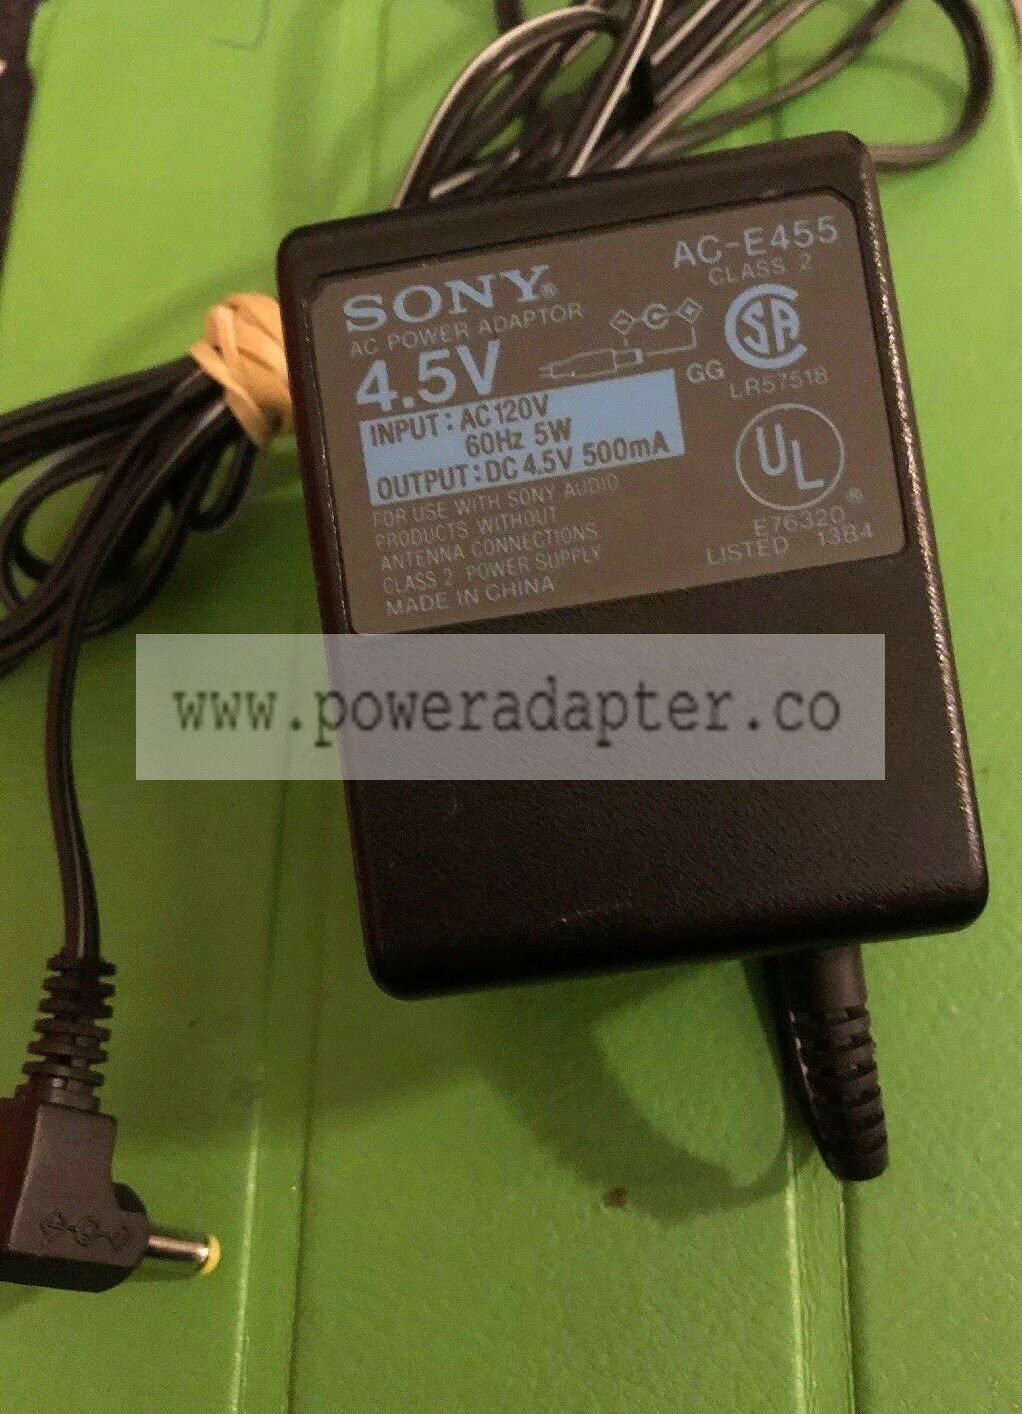 Sony Power Supply AC Adapter 4.5 Volt for CD, Diskman, MD Minidisc, MP3 AC-E455 Type: AC/AC Adapter Brand: Sony Output